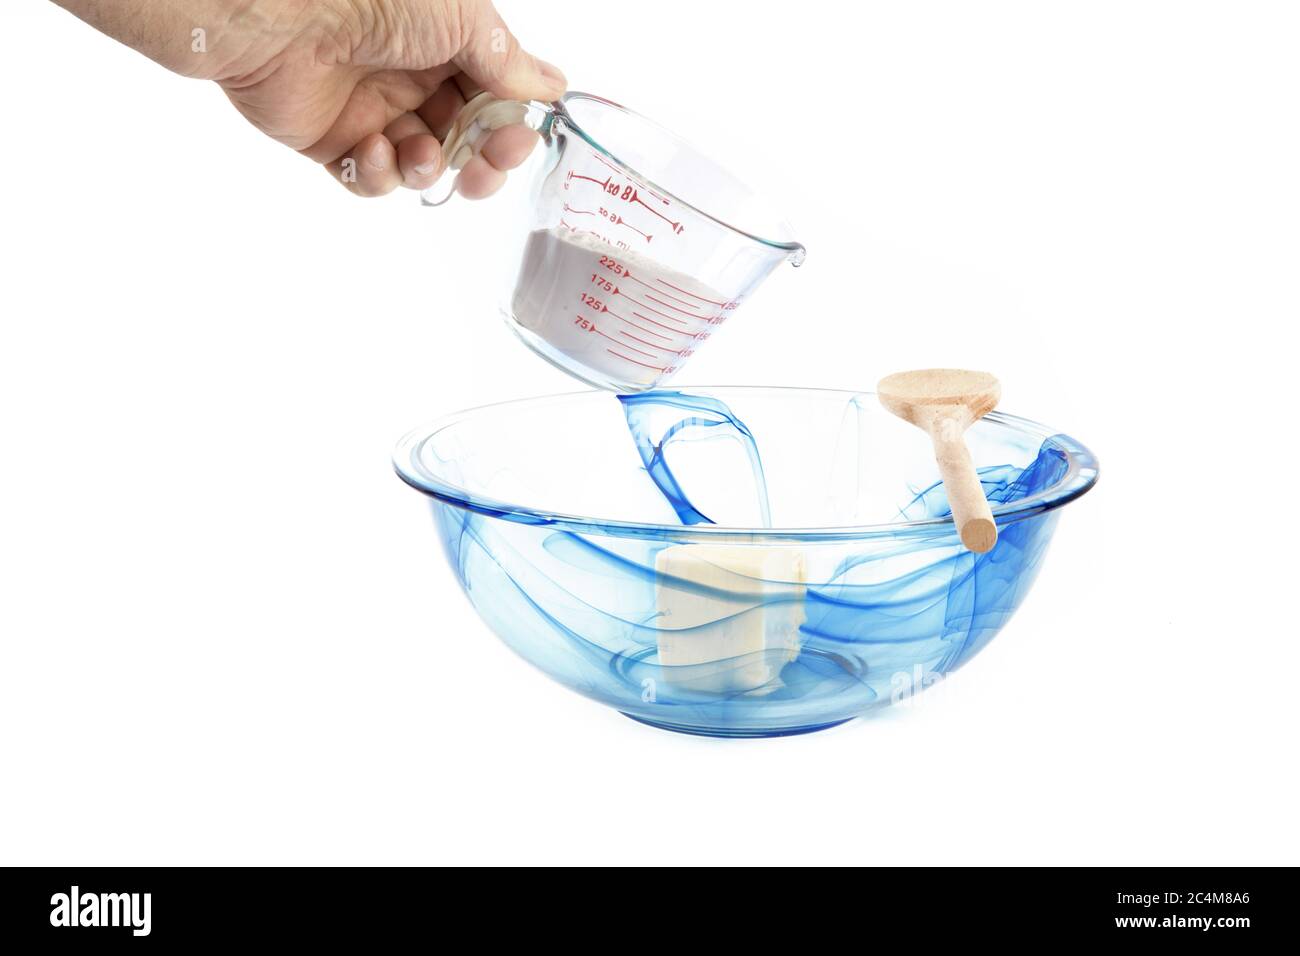 https://c8.alamy.com/comp/2C4M8A6/a-bakers-hand-pouring-flour-into-a-blue-glass-mixing-bowl-with-butter-isolated-on-white-2C4M8A6.jpg